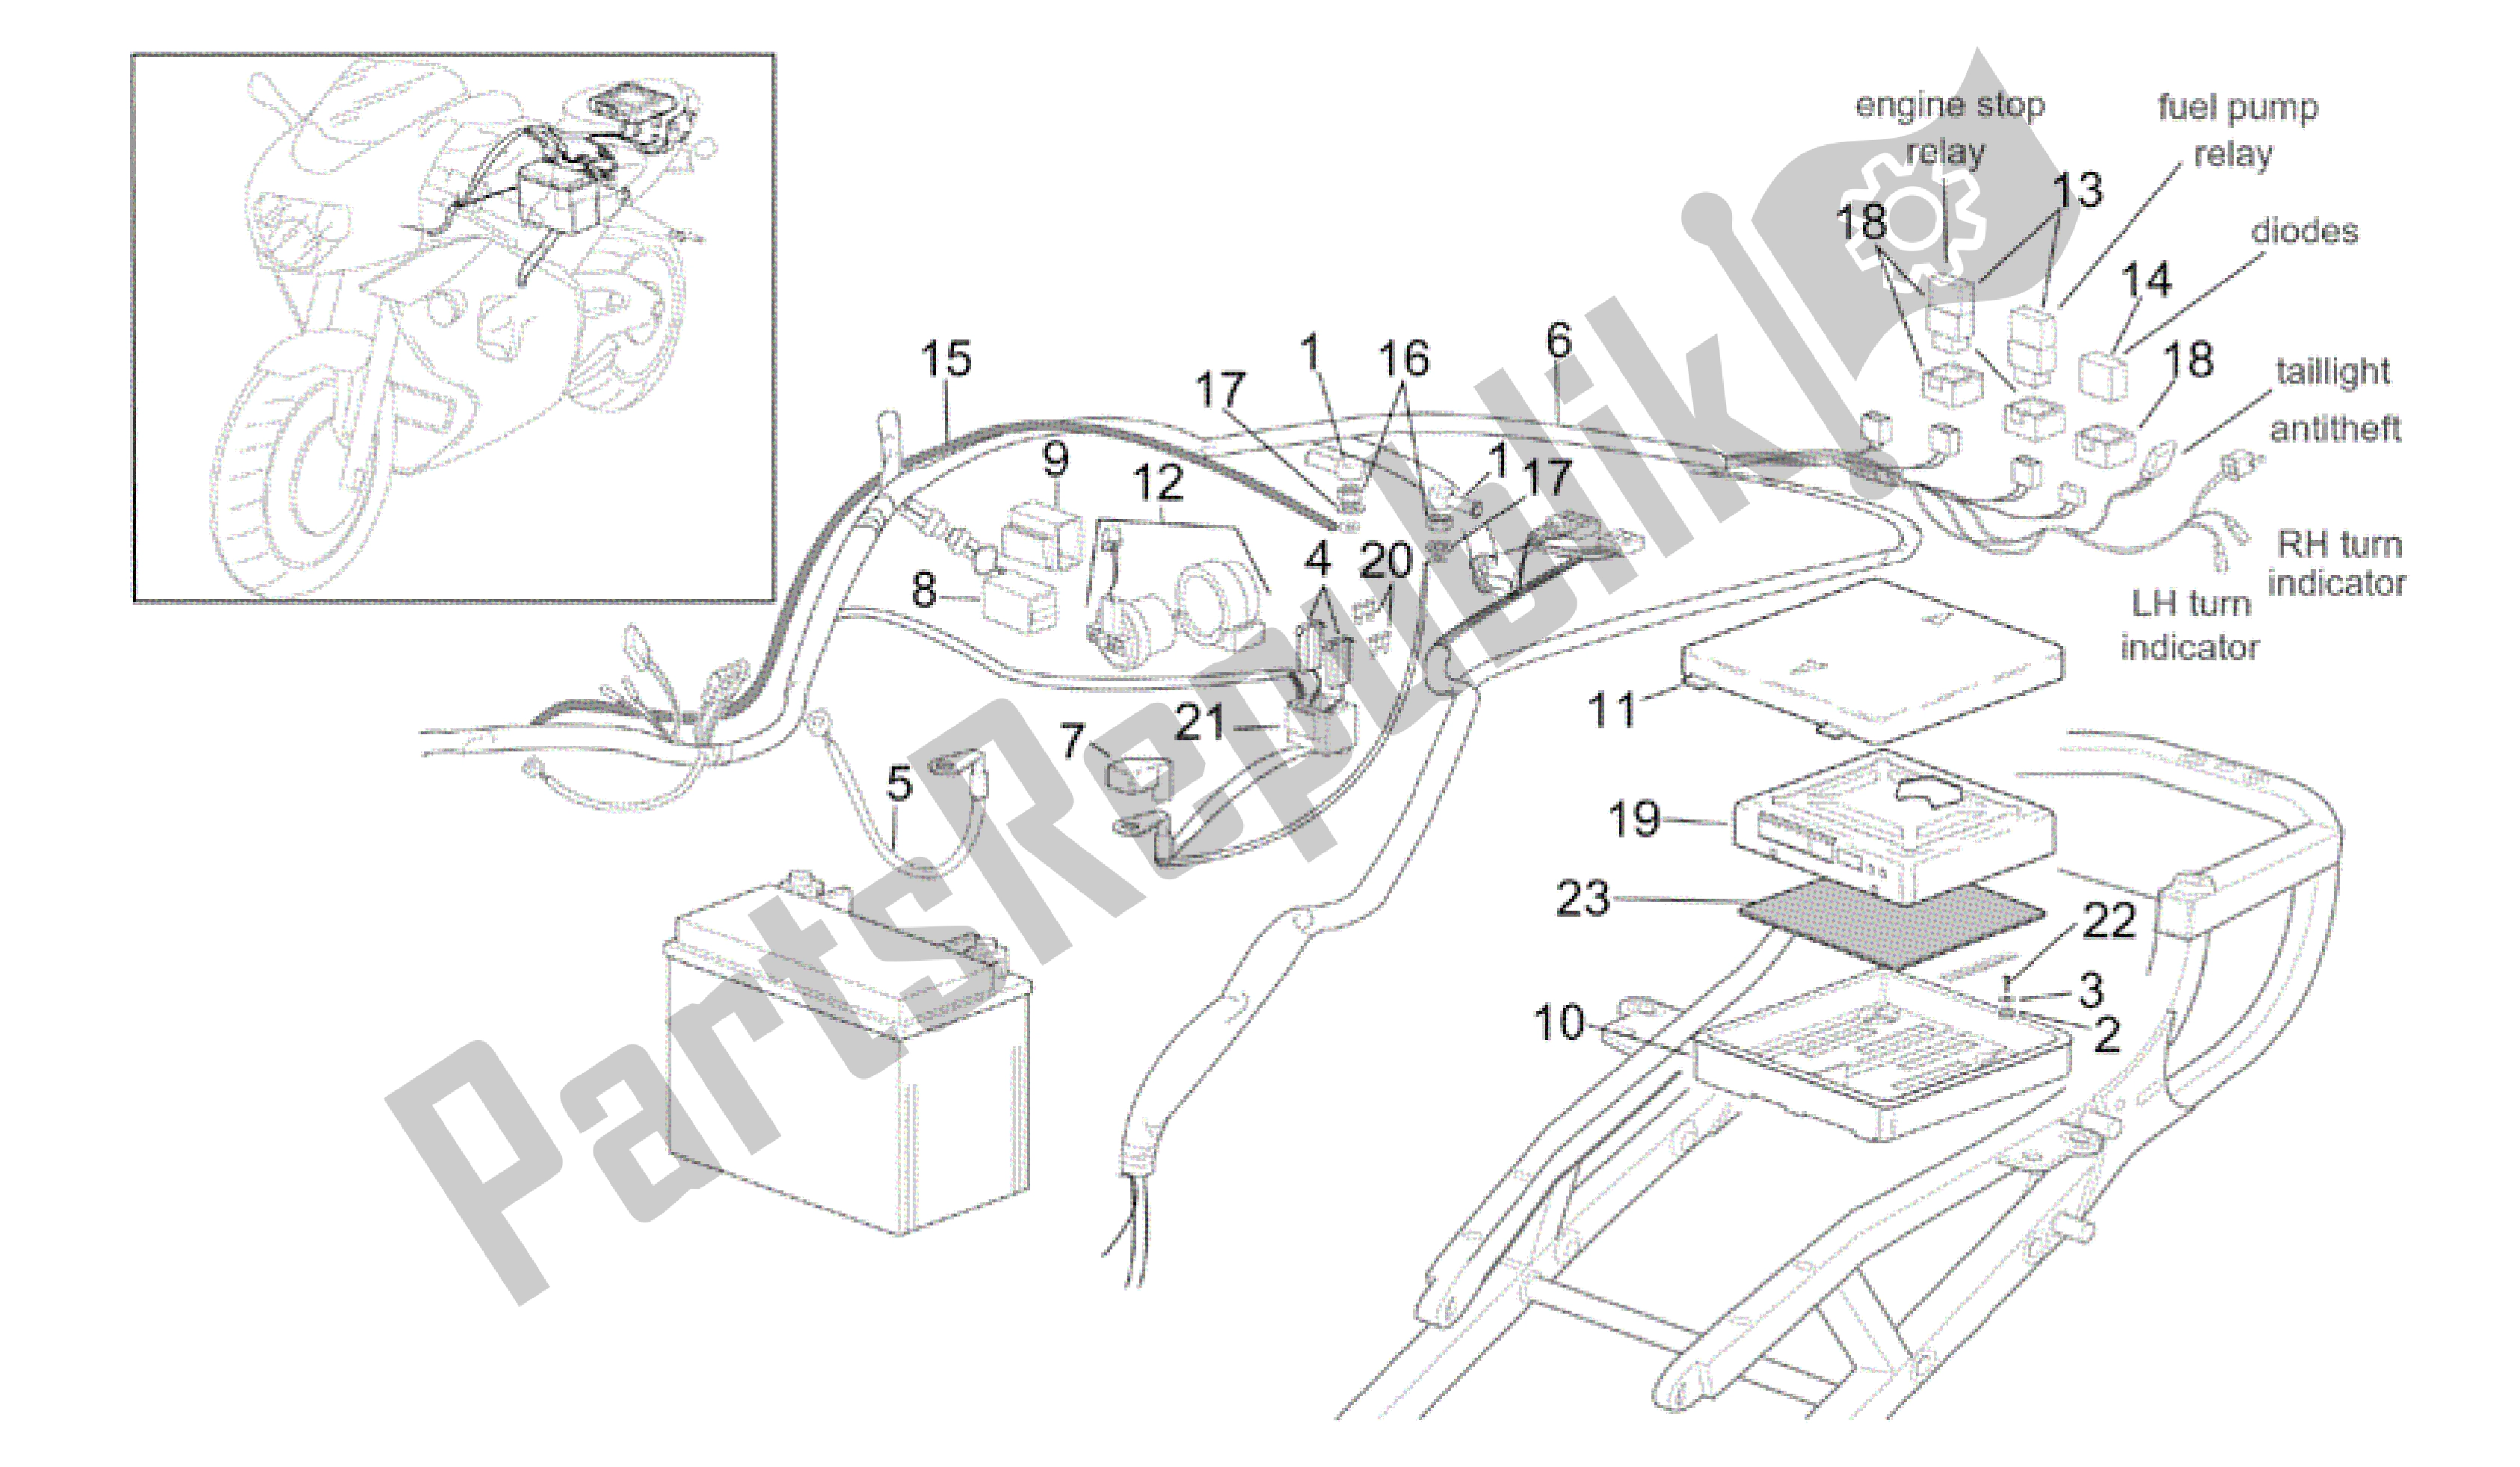 All parts for the Rear Electrical System of the Aprilia RSV Tuono 3952 1000 2002 - 2003